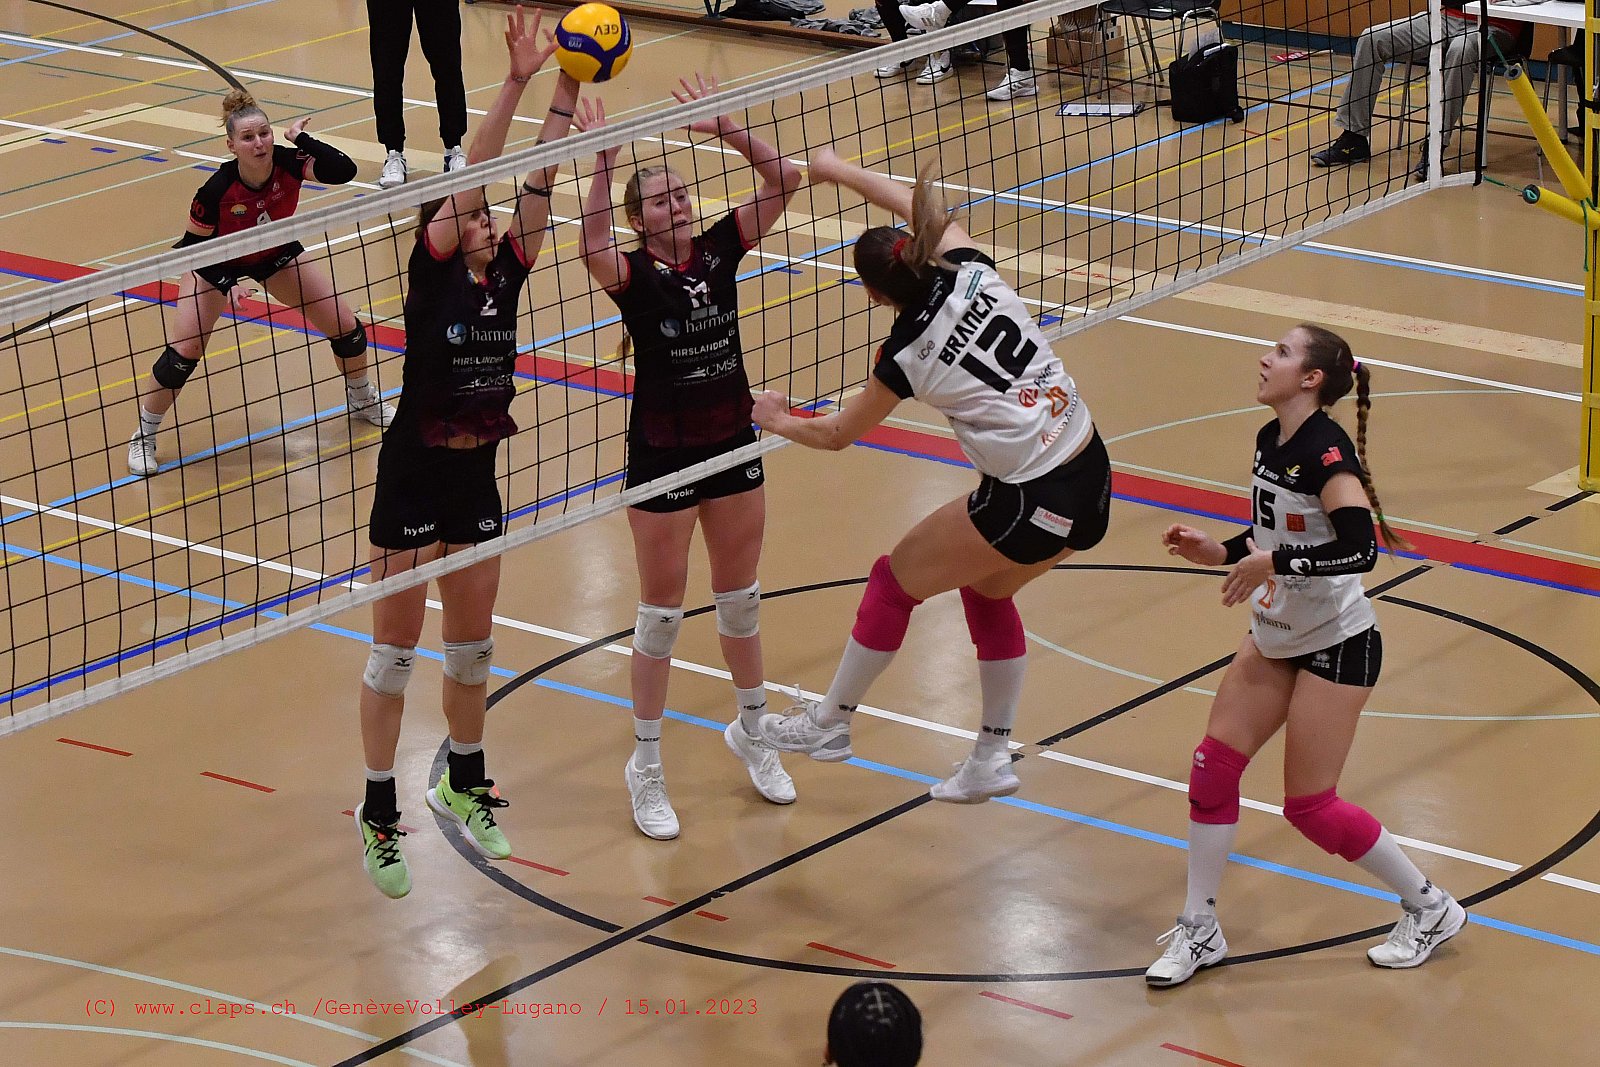 20230115 GenèveVolley - Lugano coupe Suisse